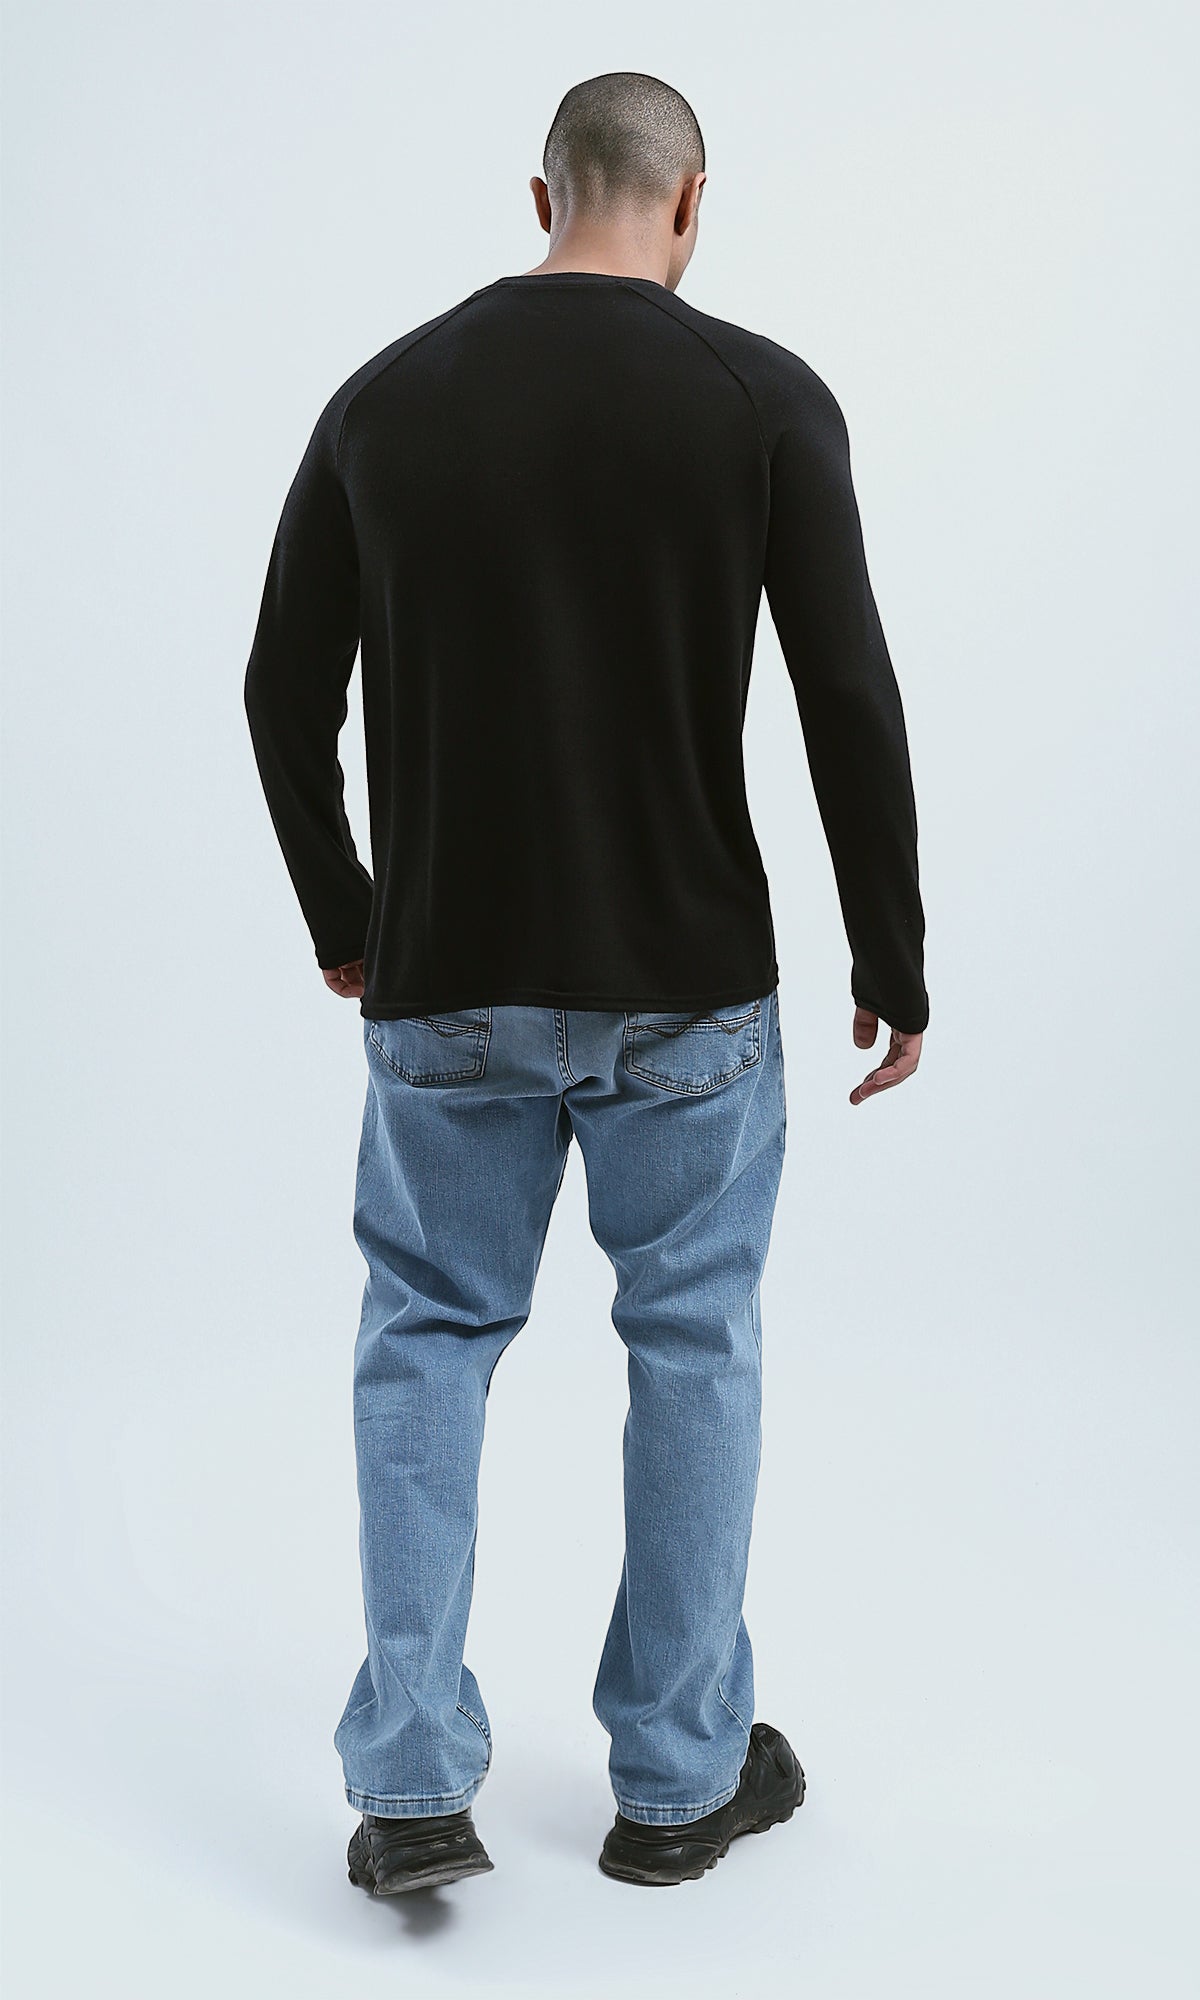 O192316 Black Long Sleeves Slip On Tee With Crew Neck